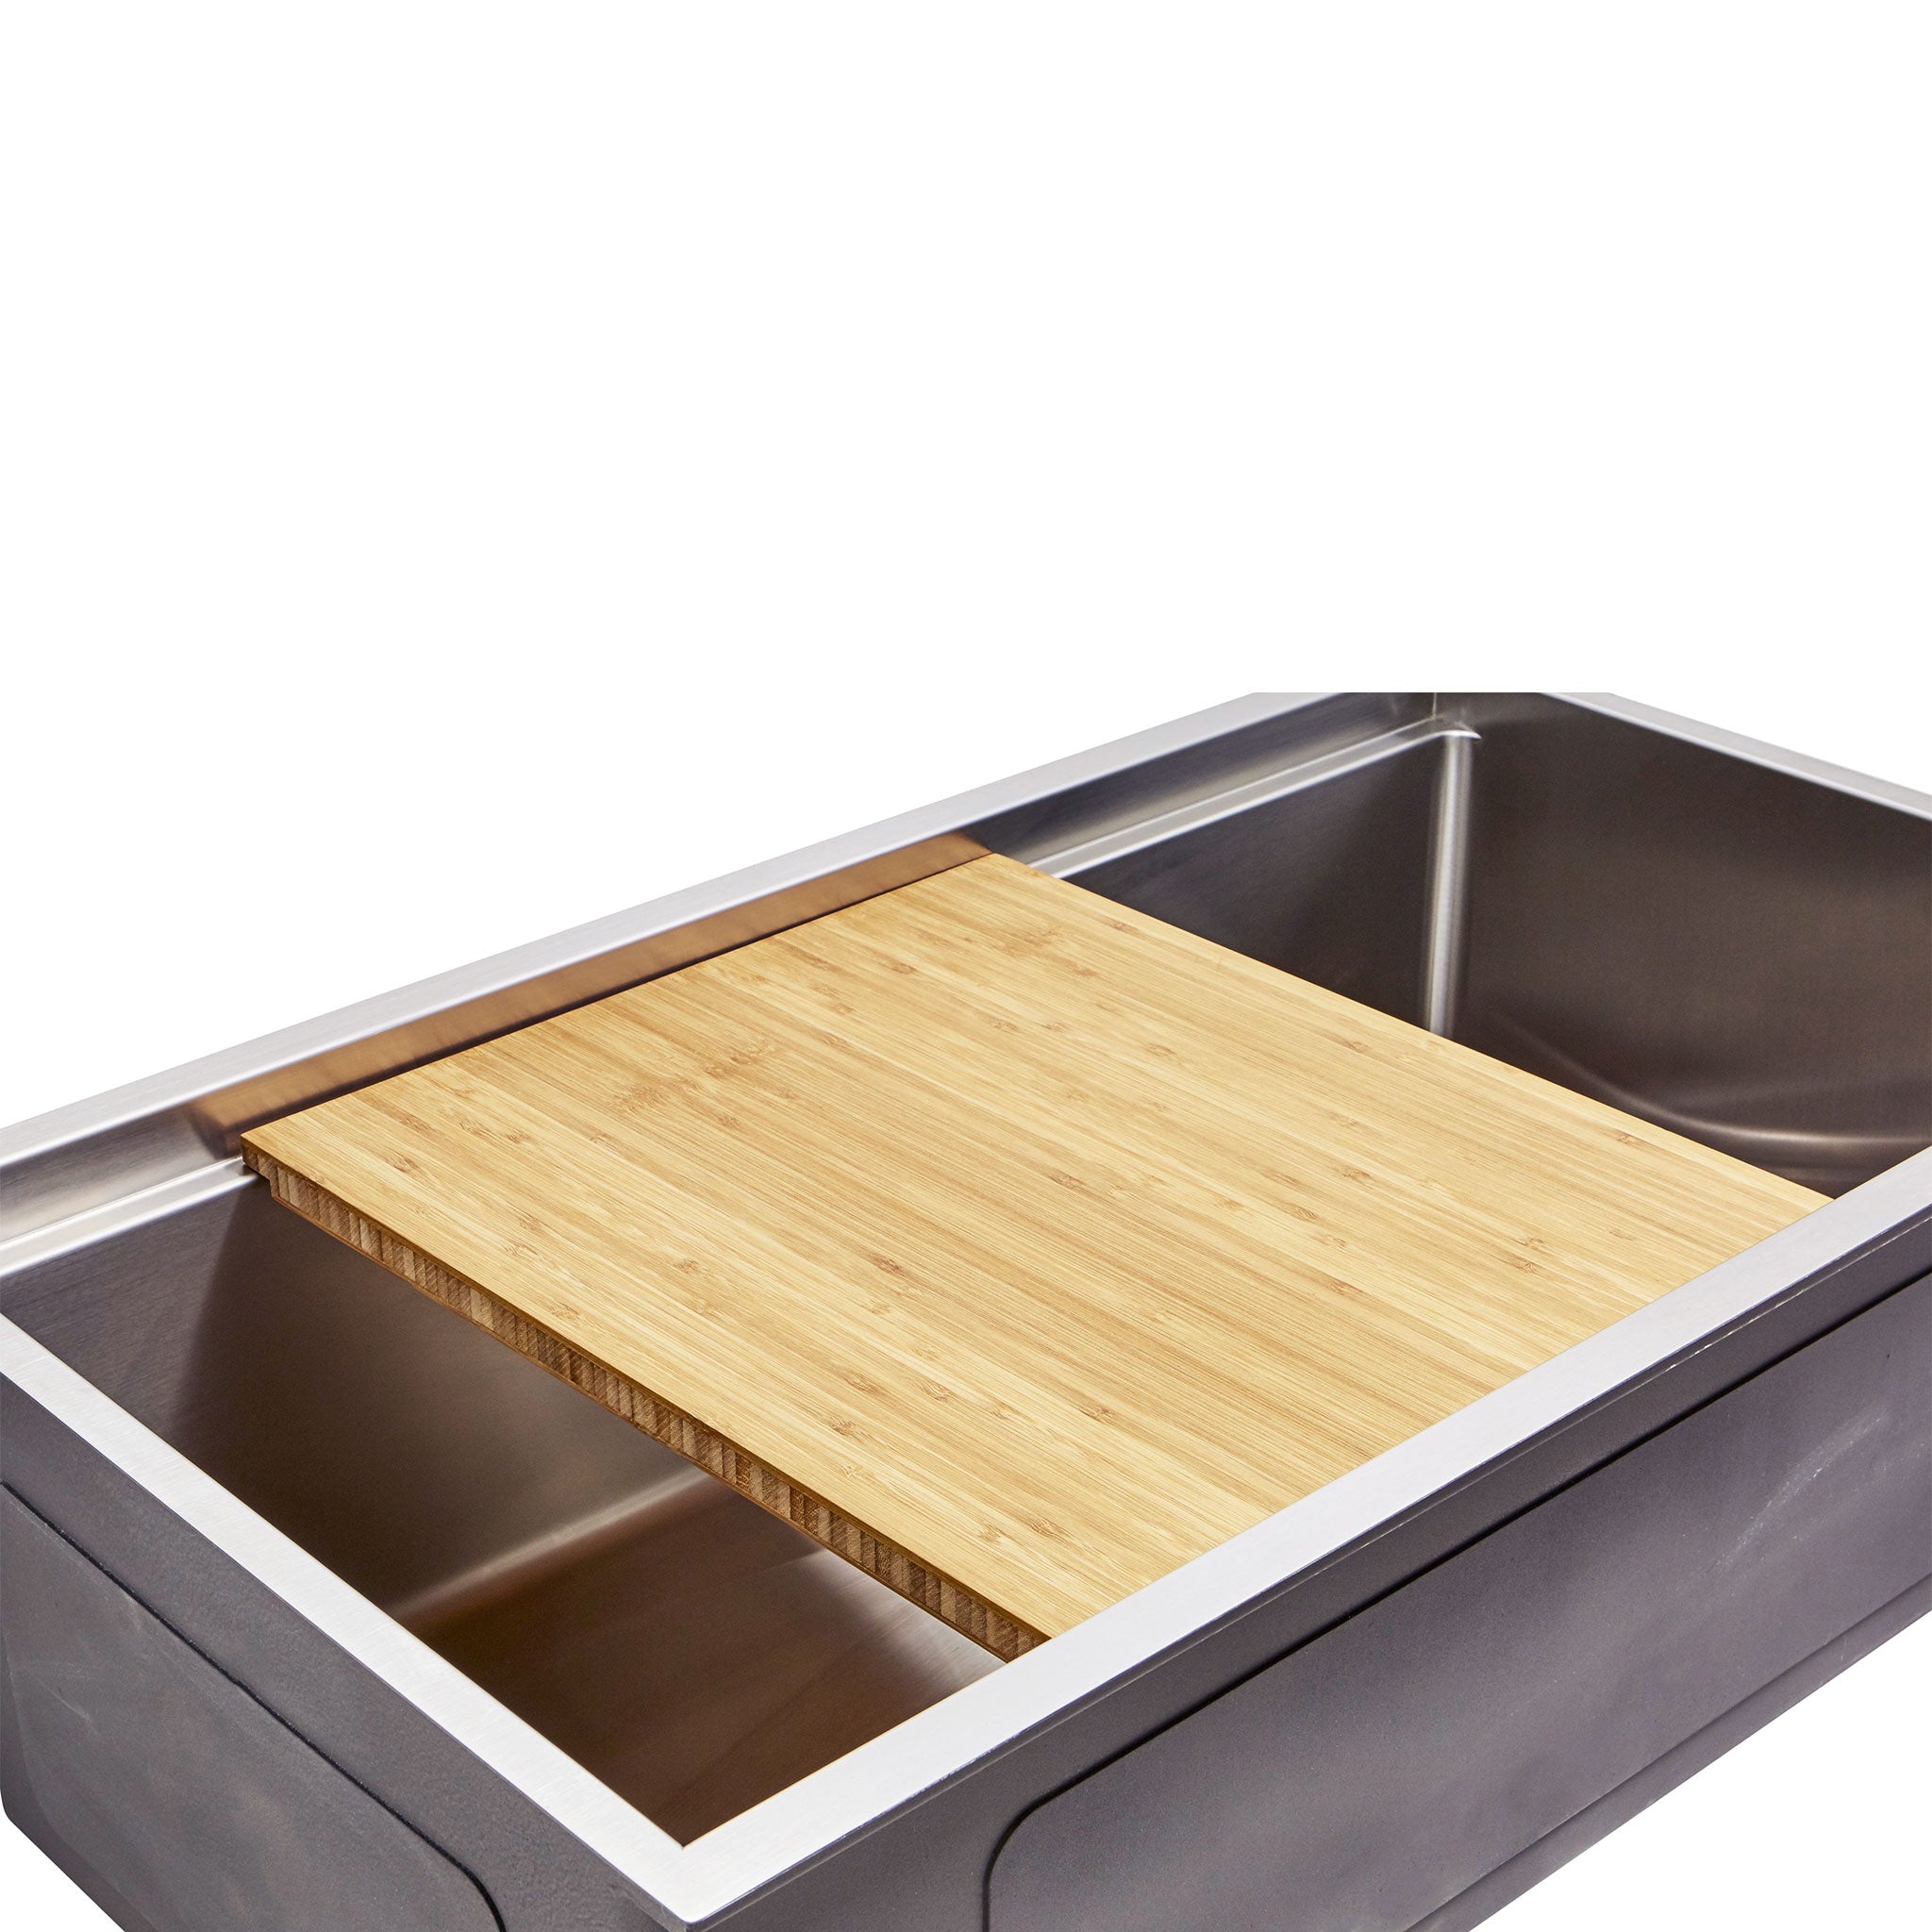 Workstation Sink Accessory - 15 Bamboo Cutting Board with Silicone Co –  Create Good Sinks